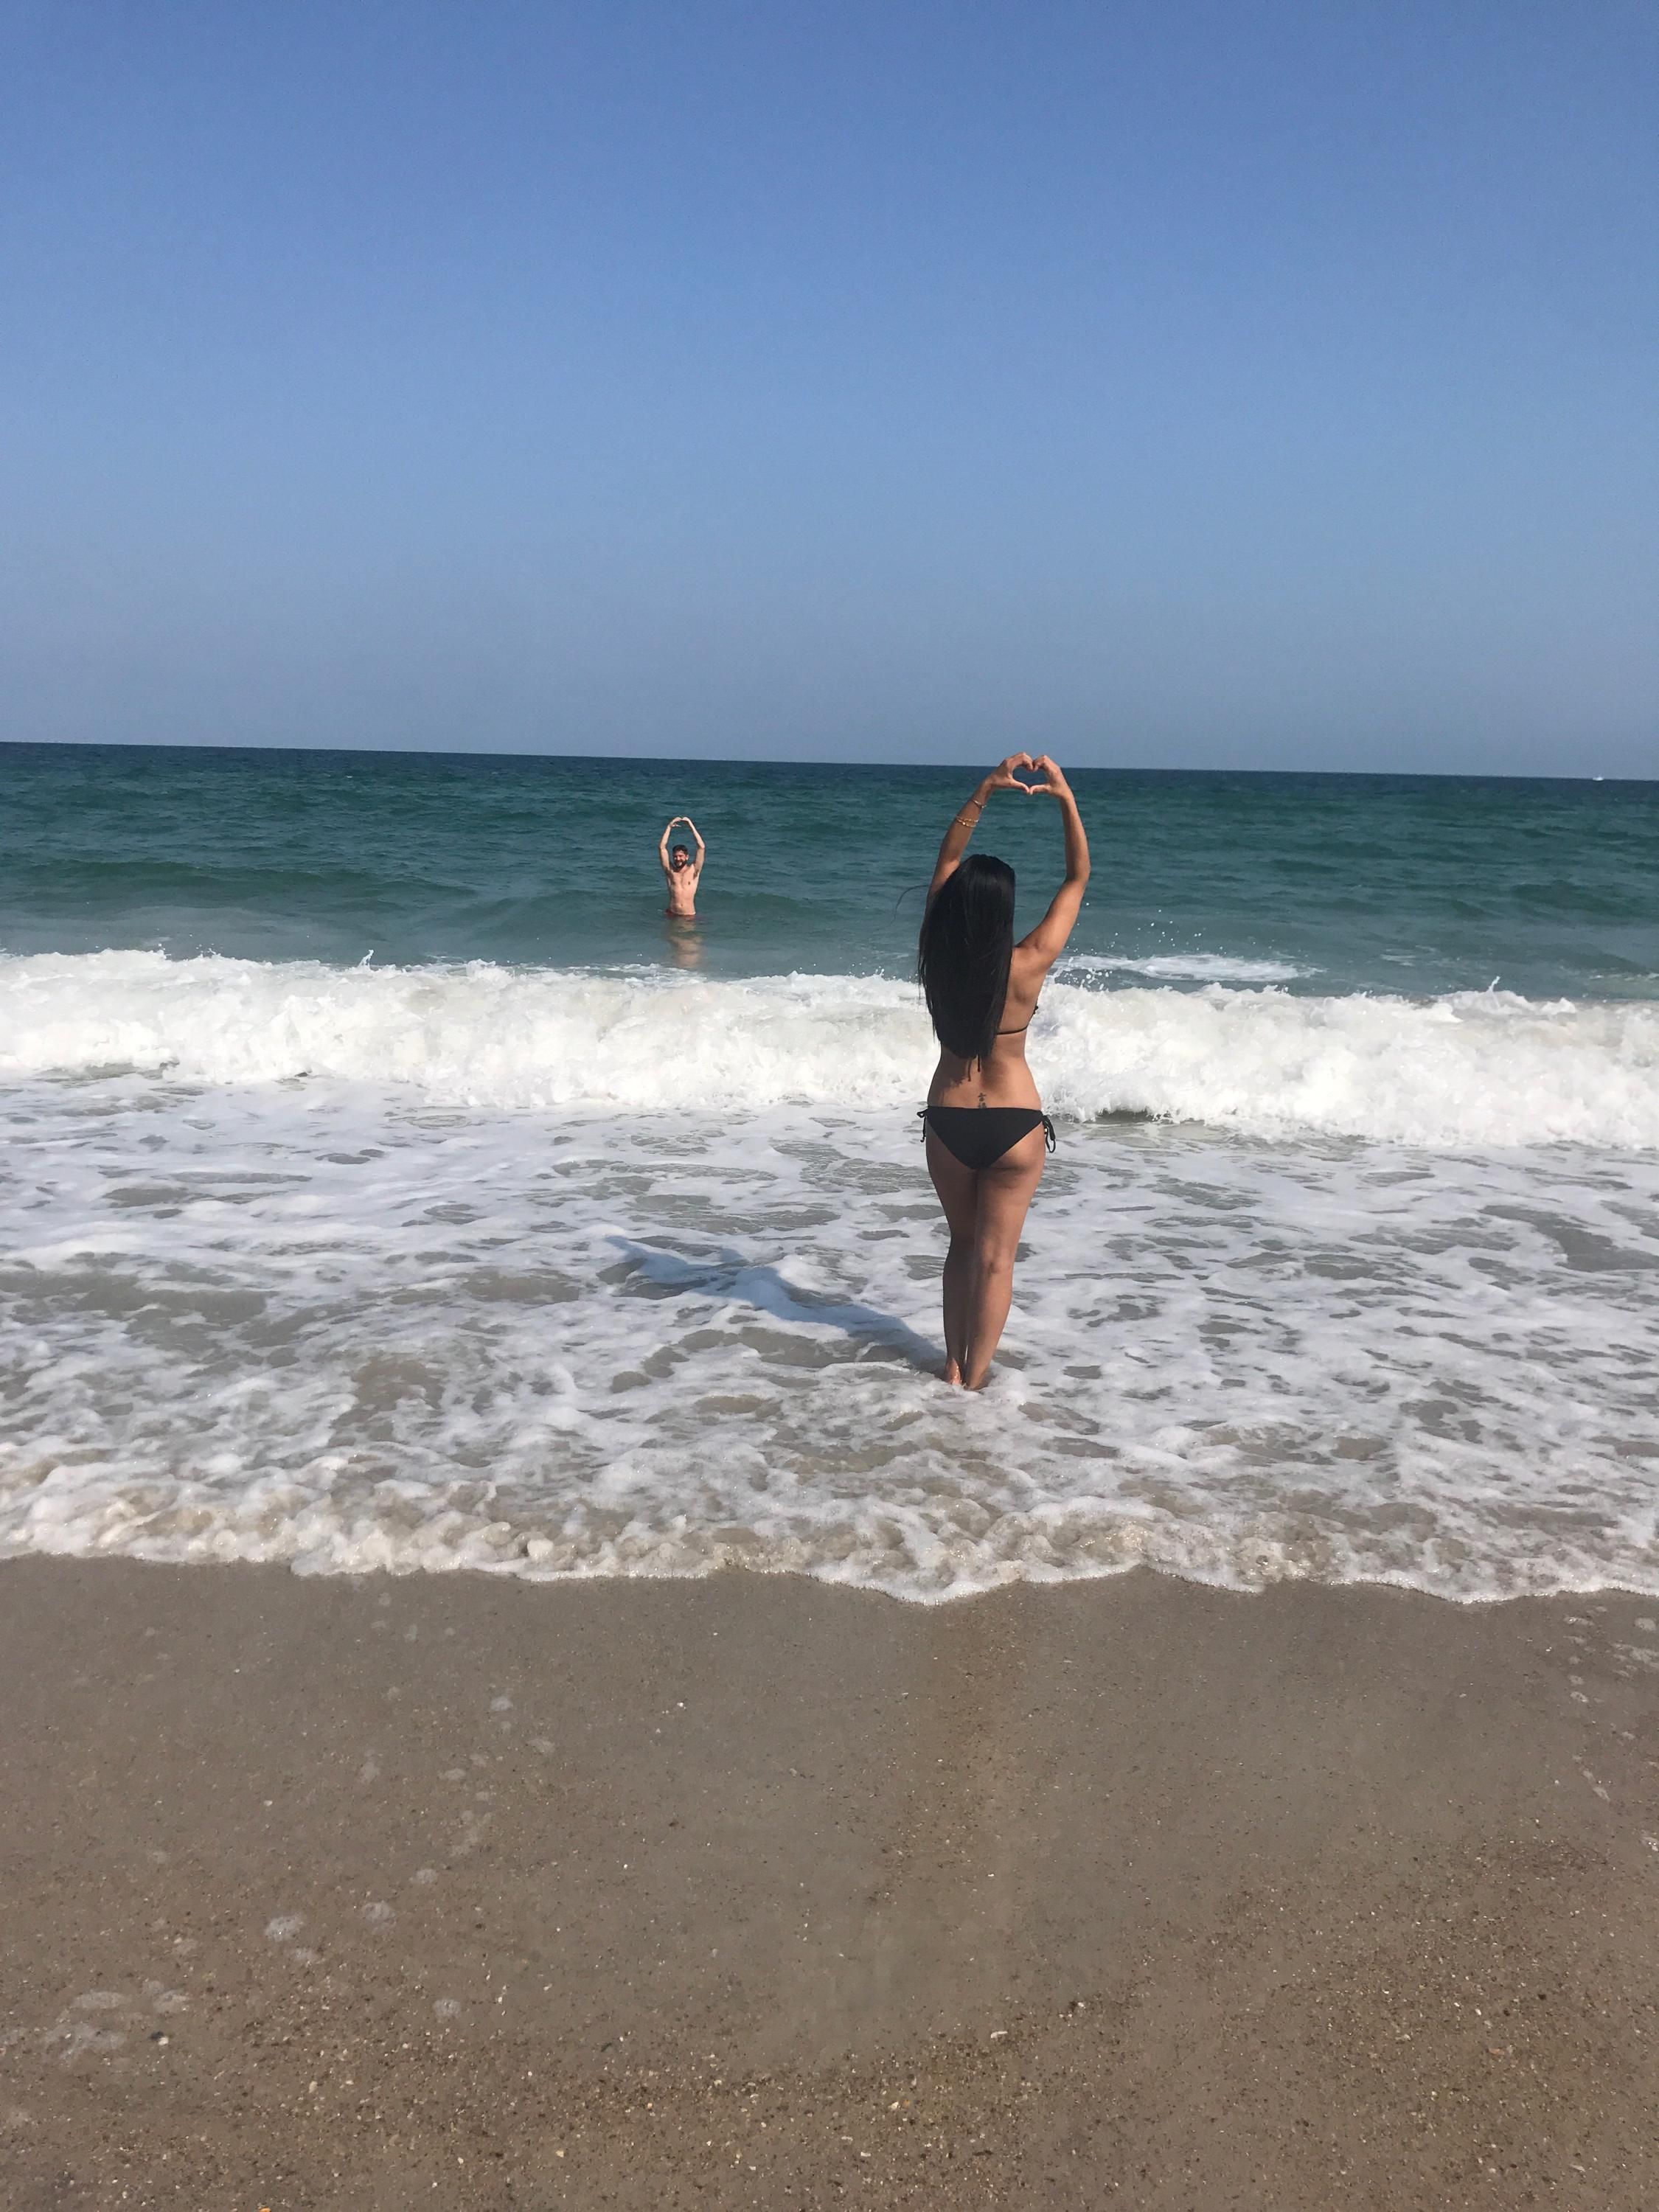 I photobombed a girl on the beach taking pictures, told them about it and had them send it to me.